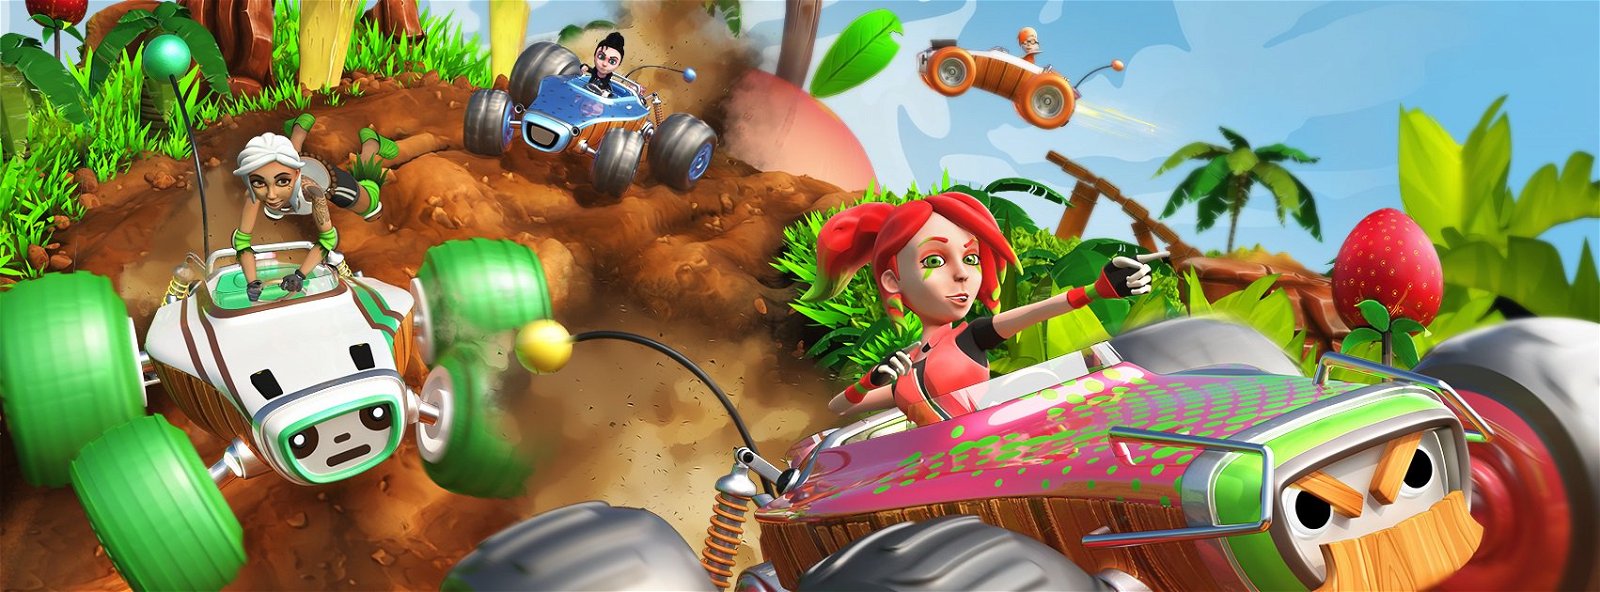 All-Star Fruit Racing | Recensione Switch